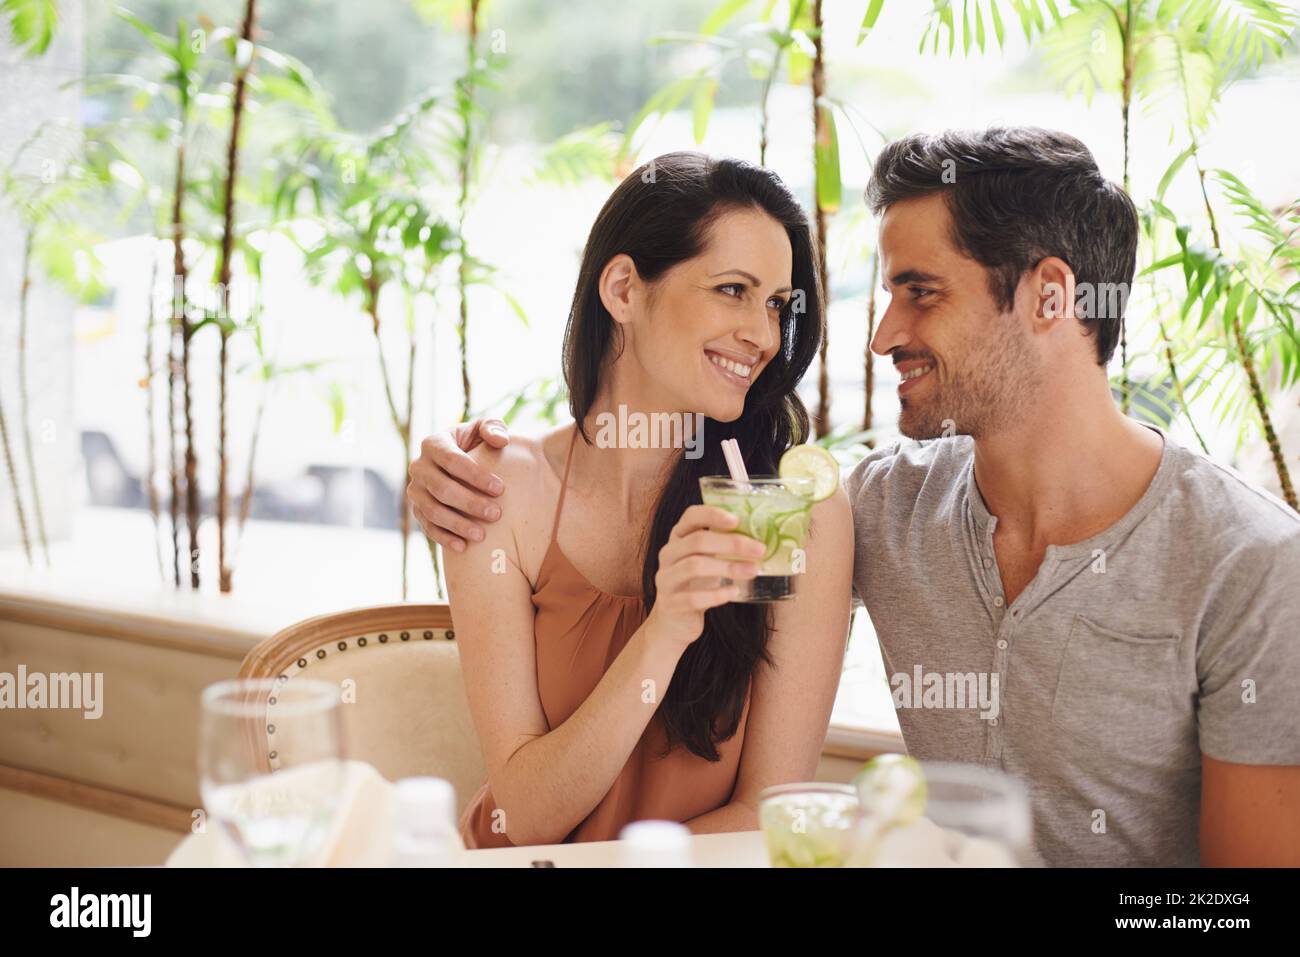 Thanks for treating me. A couple on a romantic date at a fine dining restaurant. Stock Photo